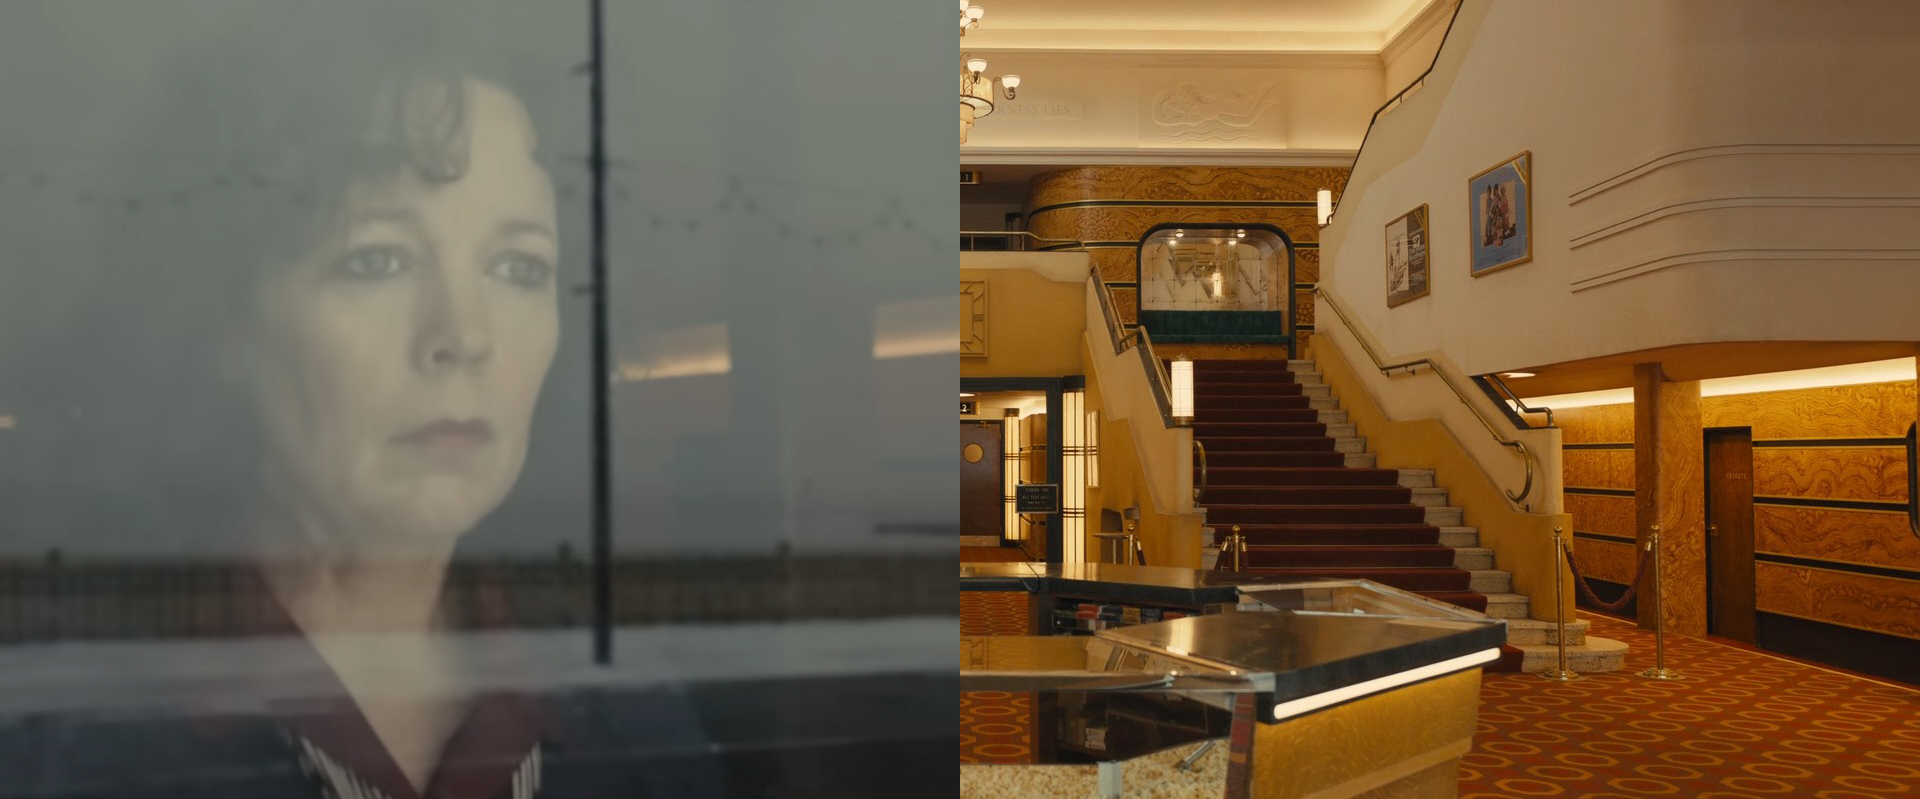 The subtle cinematography of Roger Deakins on "Empire of Light": comparing 2 color schemes - outside world and interior feeling.